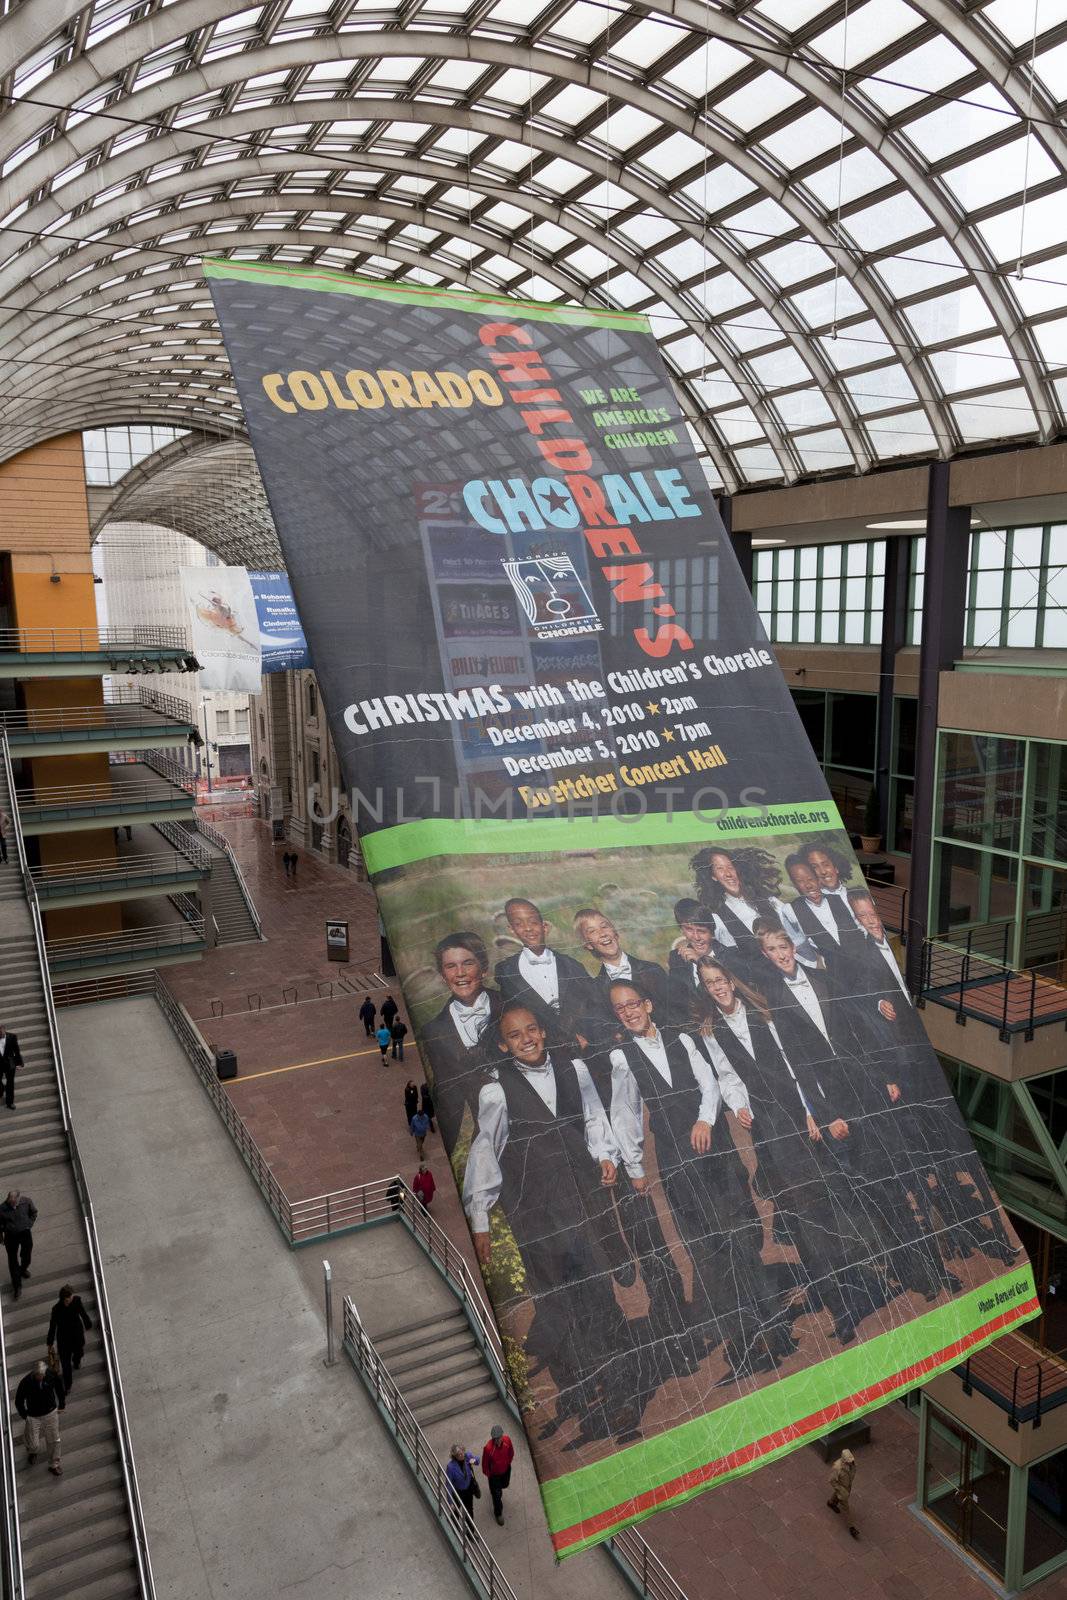 DENVER, USA, April 3, 2011. The Denver Center for Performing Arts - a covered public passge with advertising banners for Colorado Children Chorale and Colorado Ballet. Denver, Colorado, April 3, 2011.